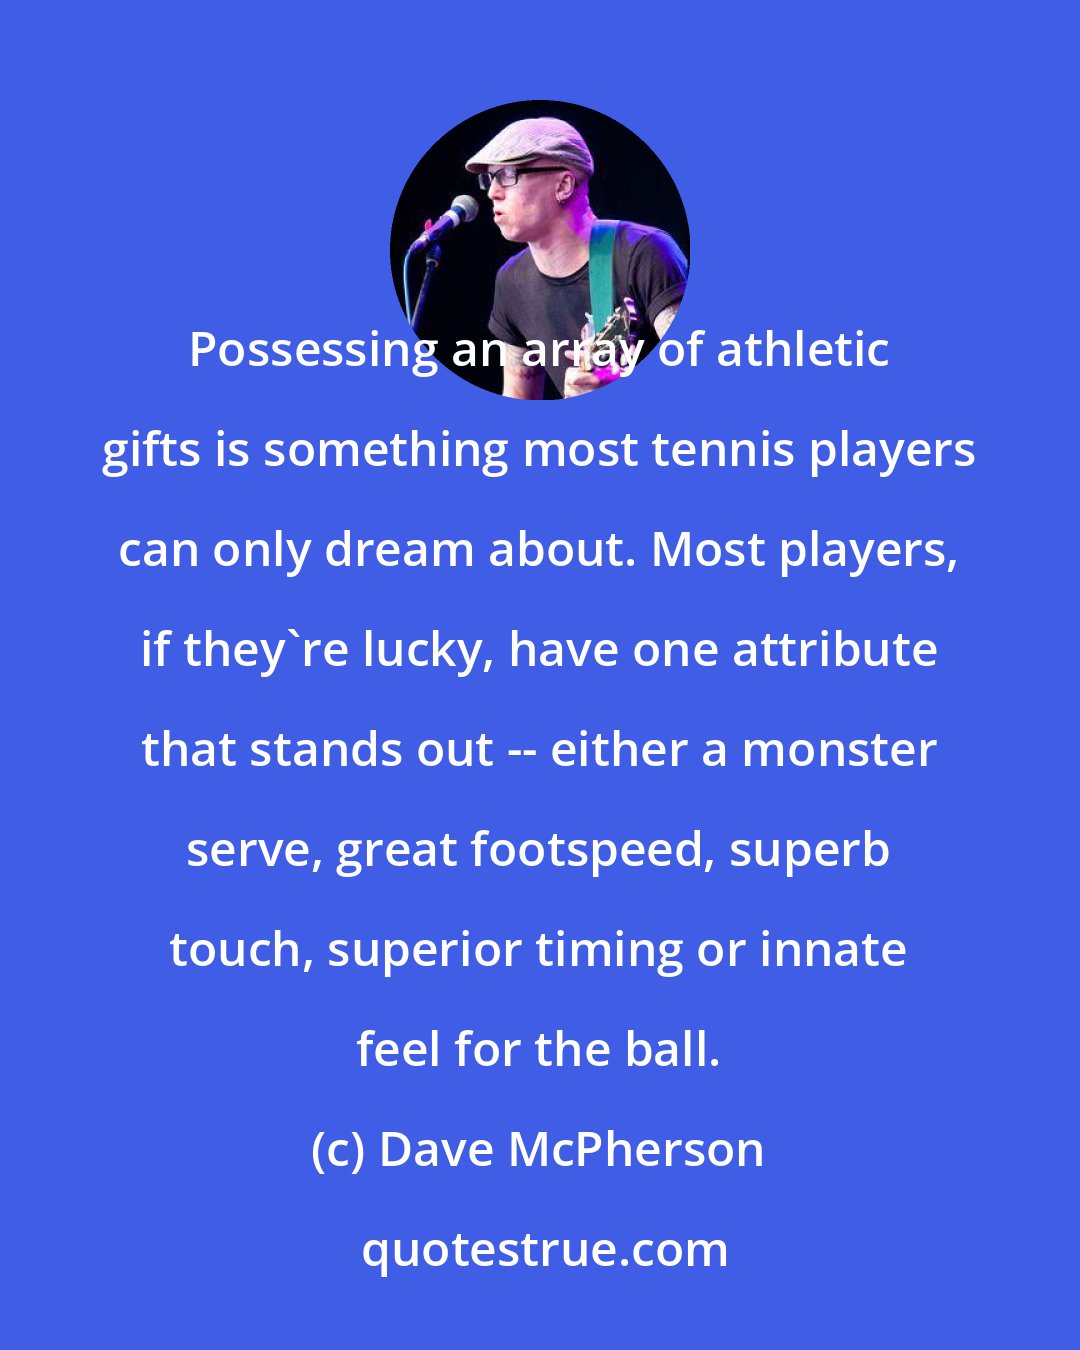 Dave McPherson: Possessing an array of athletic gifts is something most tennis players can only dream about. Most players, if they're lucky, have one attribute that stands out -- either a monster serve, great footspeed, superb touch, superior timing or innate feel for the ball.